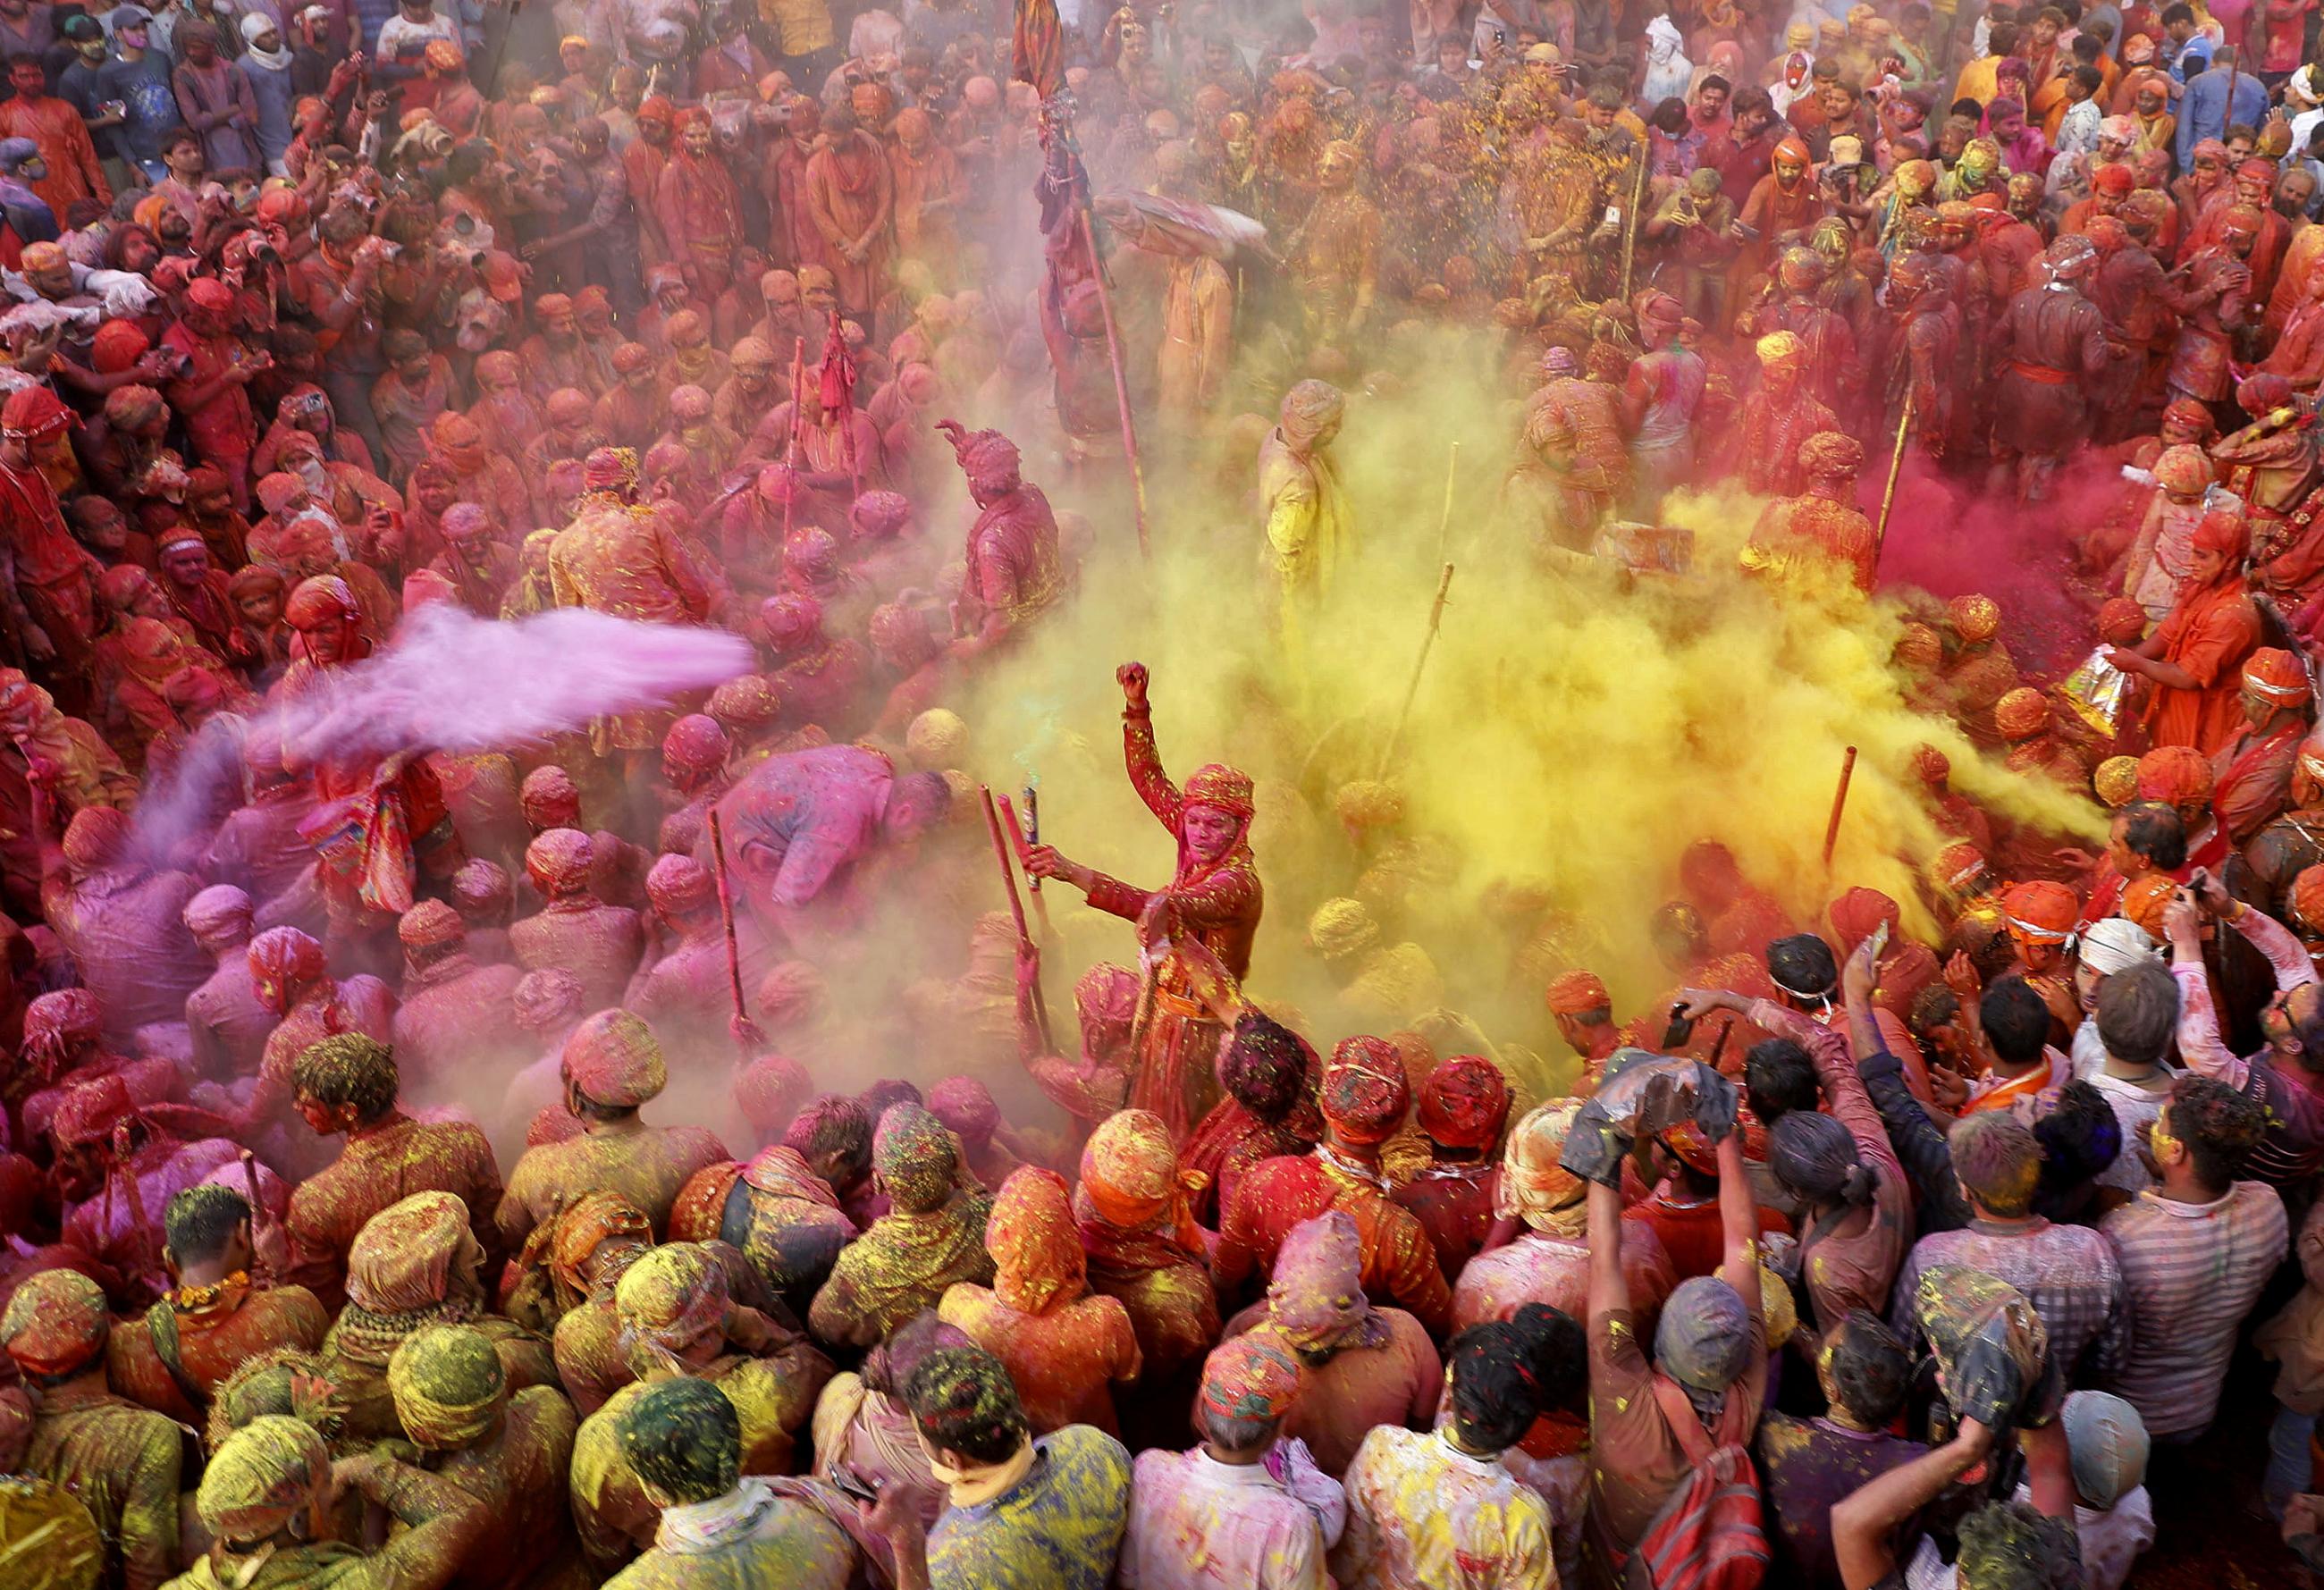 Men throw colored powder at each other during Lathmar Holi celebrations in the town of Nandgaon, in the northern state of Uttar Pradesh, India, March 24, 2021. 